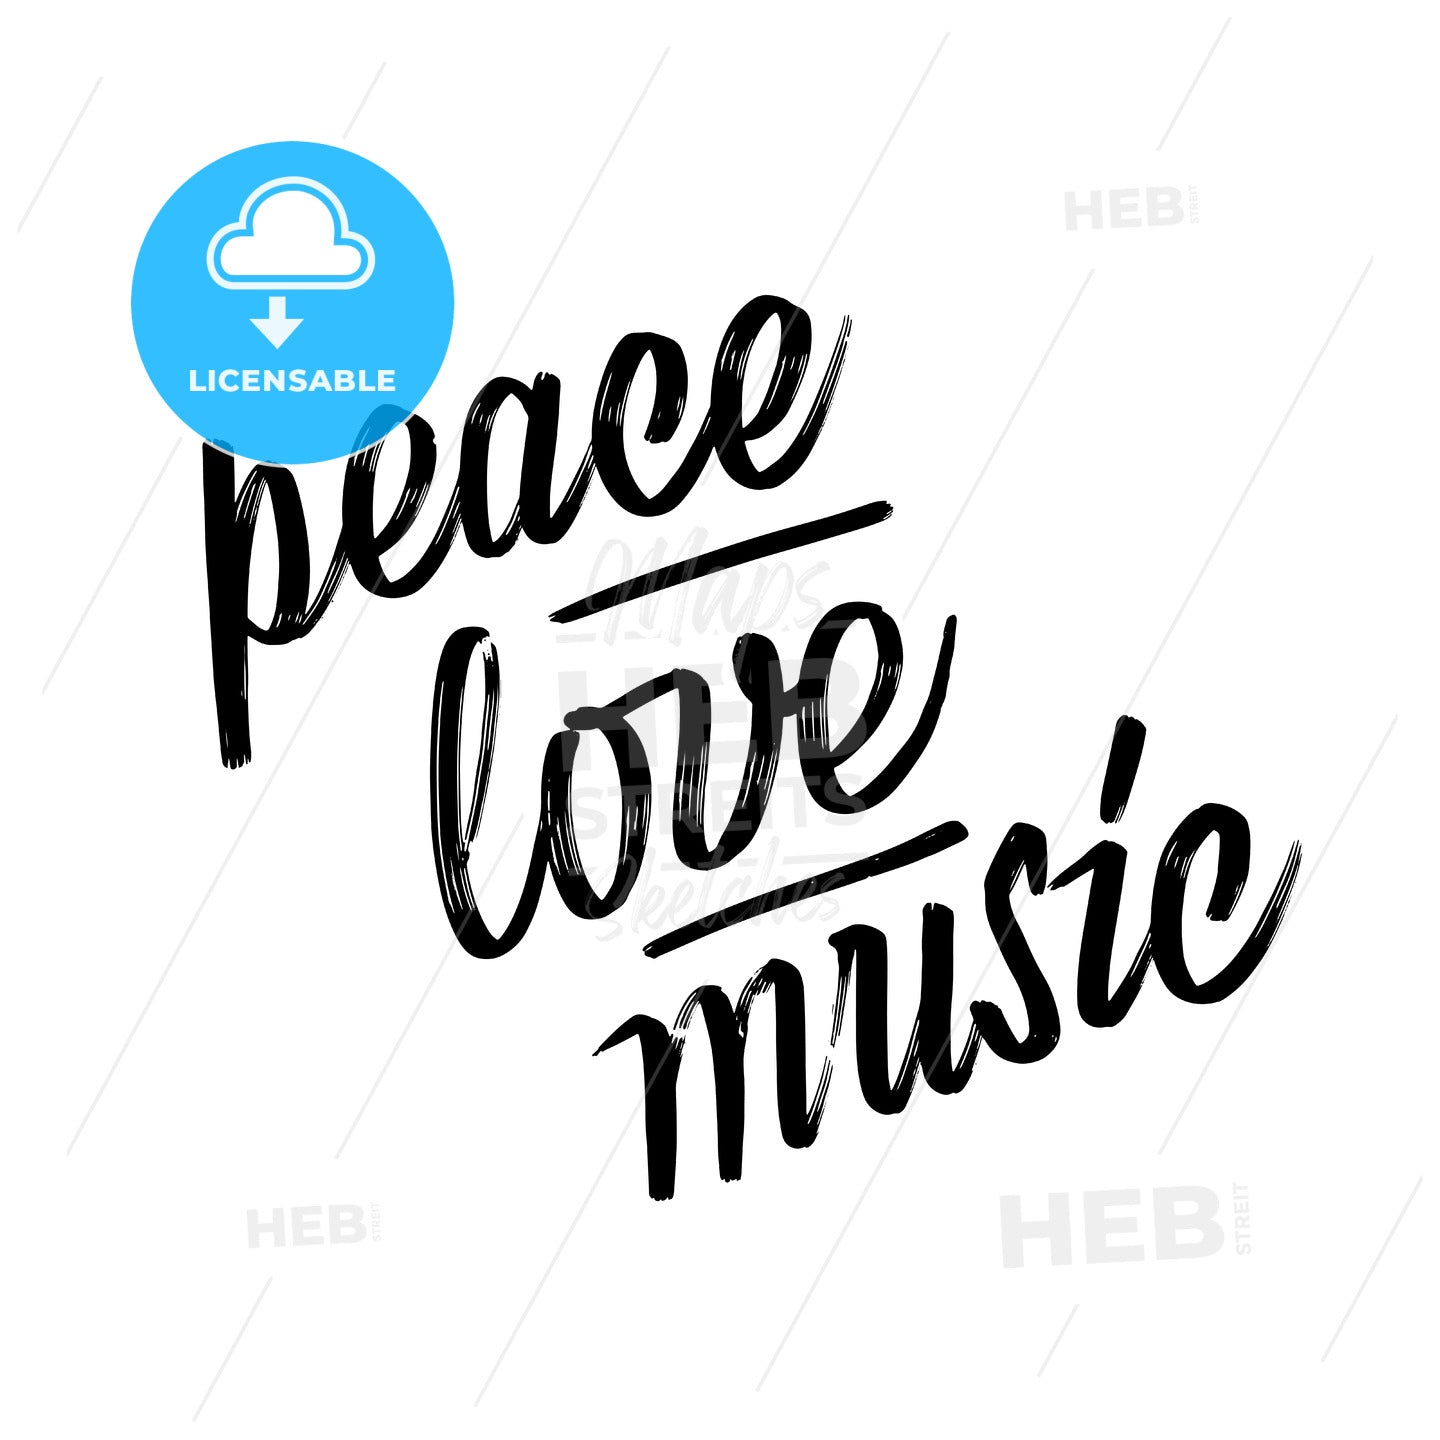 Peace, love, music. lettering by hand. – instant download